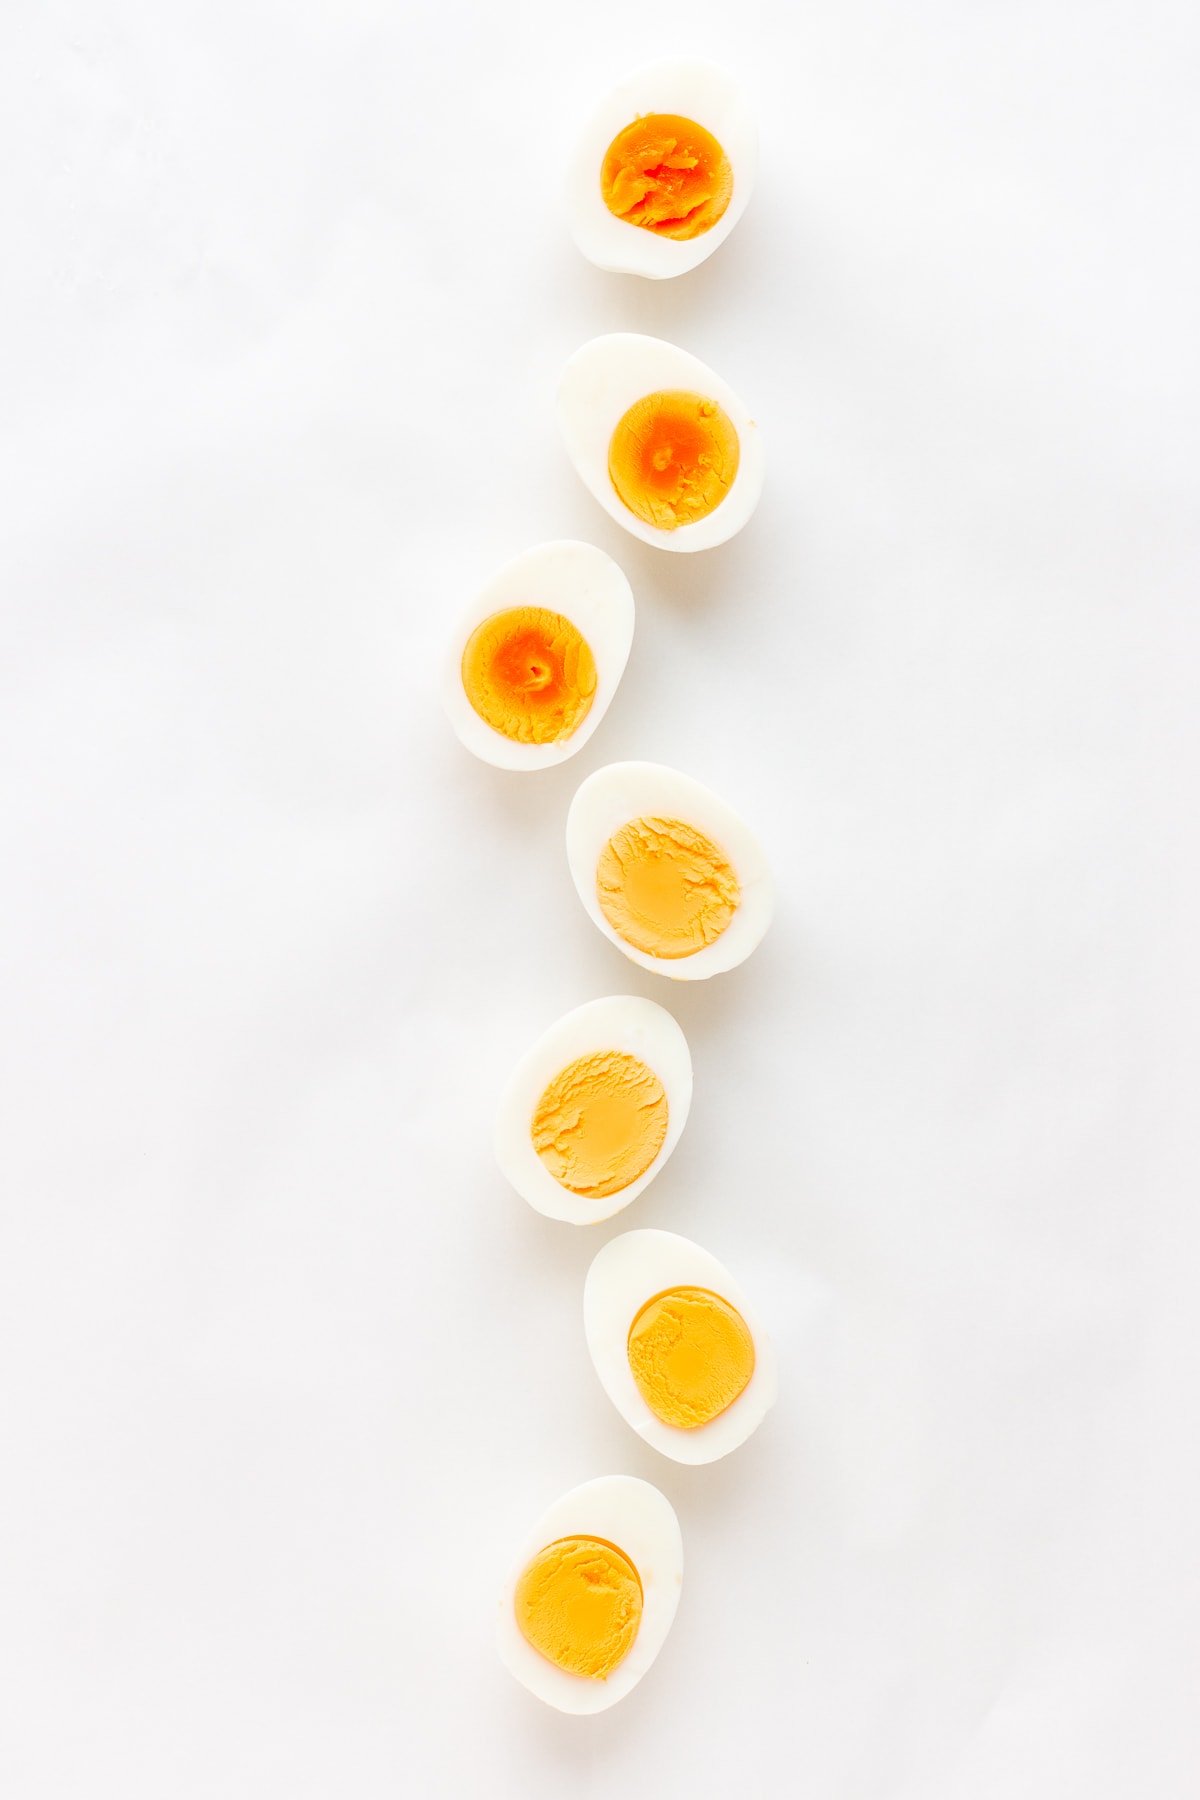 Vertical line of halved hard boiled eggs on a white background.